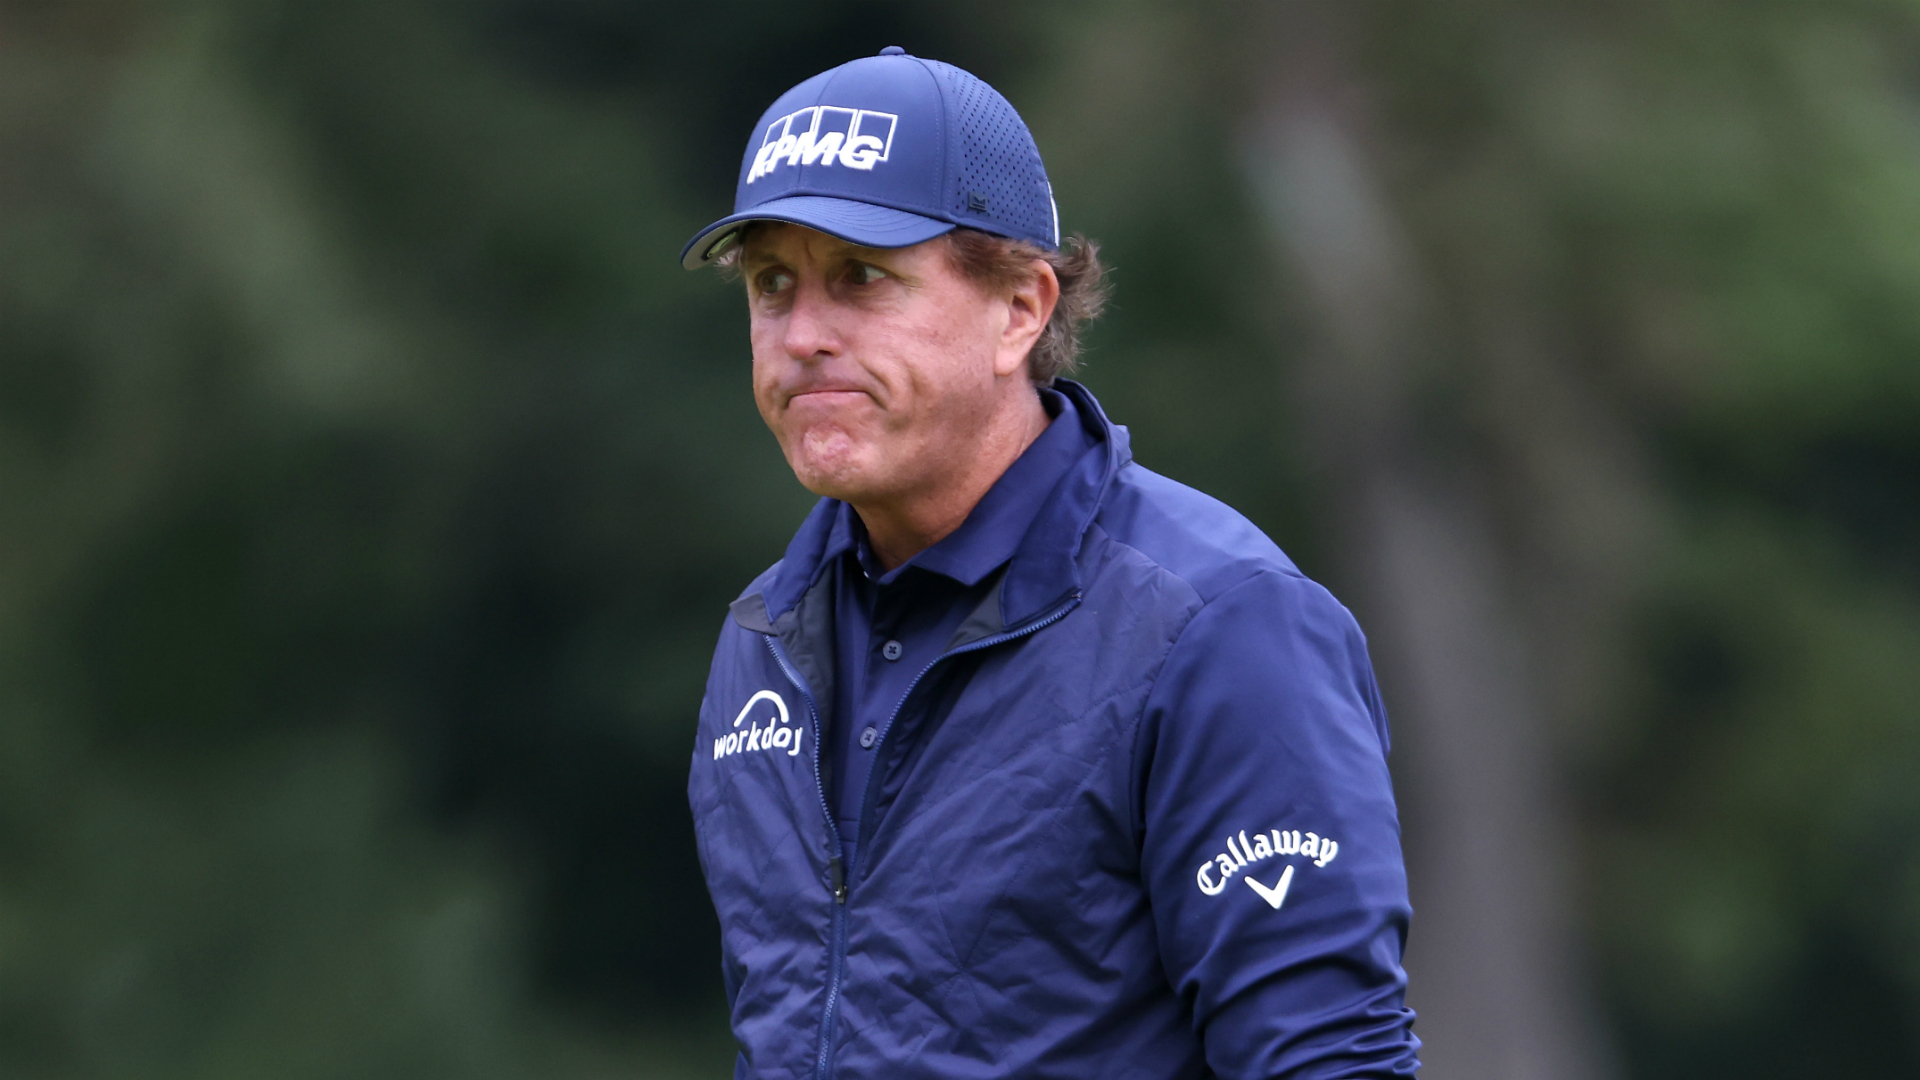 Phil Mickelson could not undo the damage of his opening round as he missed the cut at Winged Foot, scene of past U.S. Open misery for him.